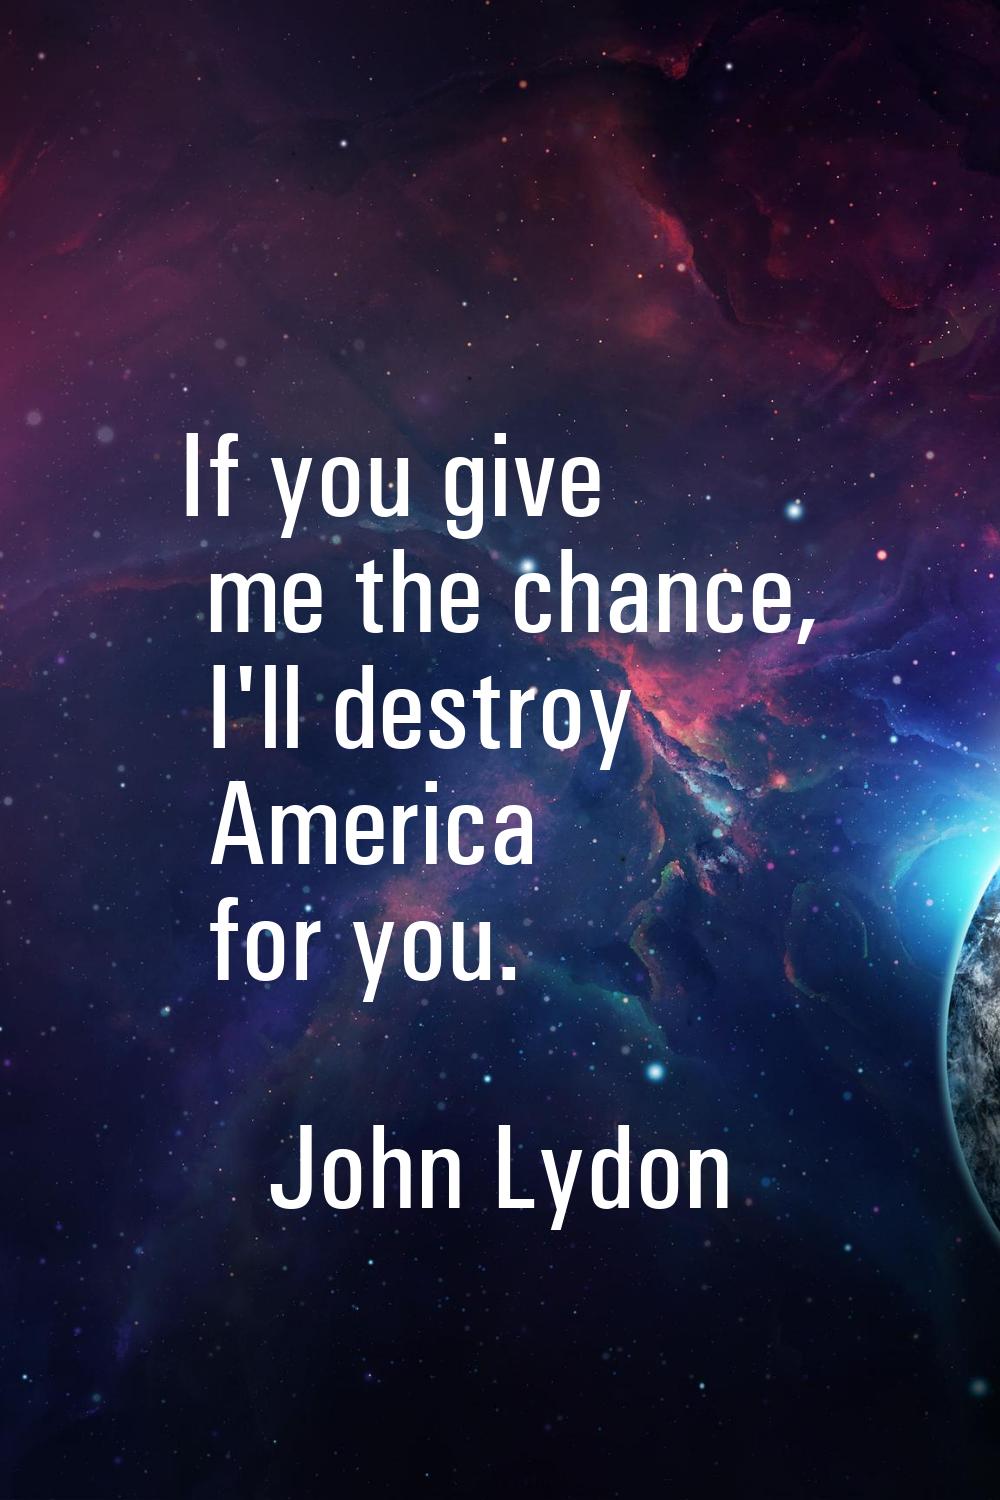 If you give me the chance, I'll destroy America for you.